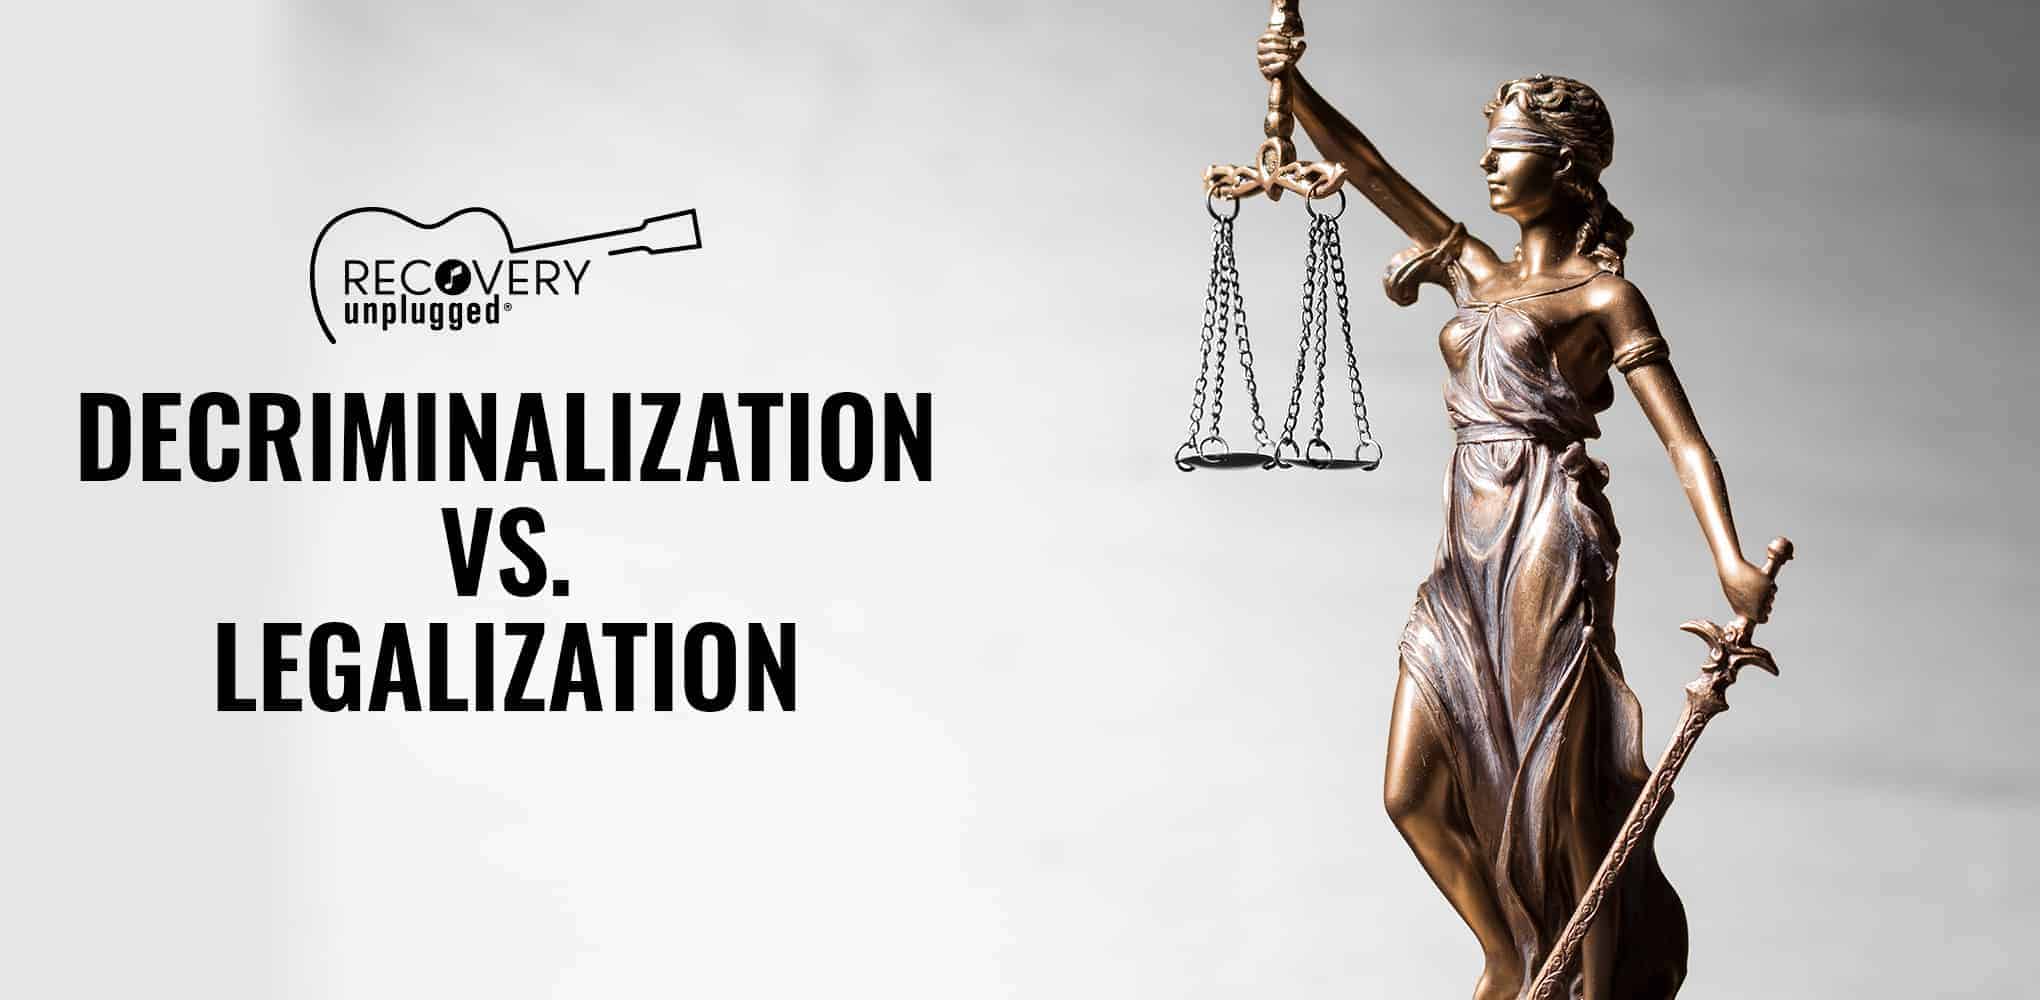 Legalization and Decriminalization: What's the Difference?